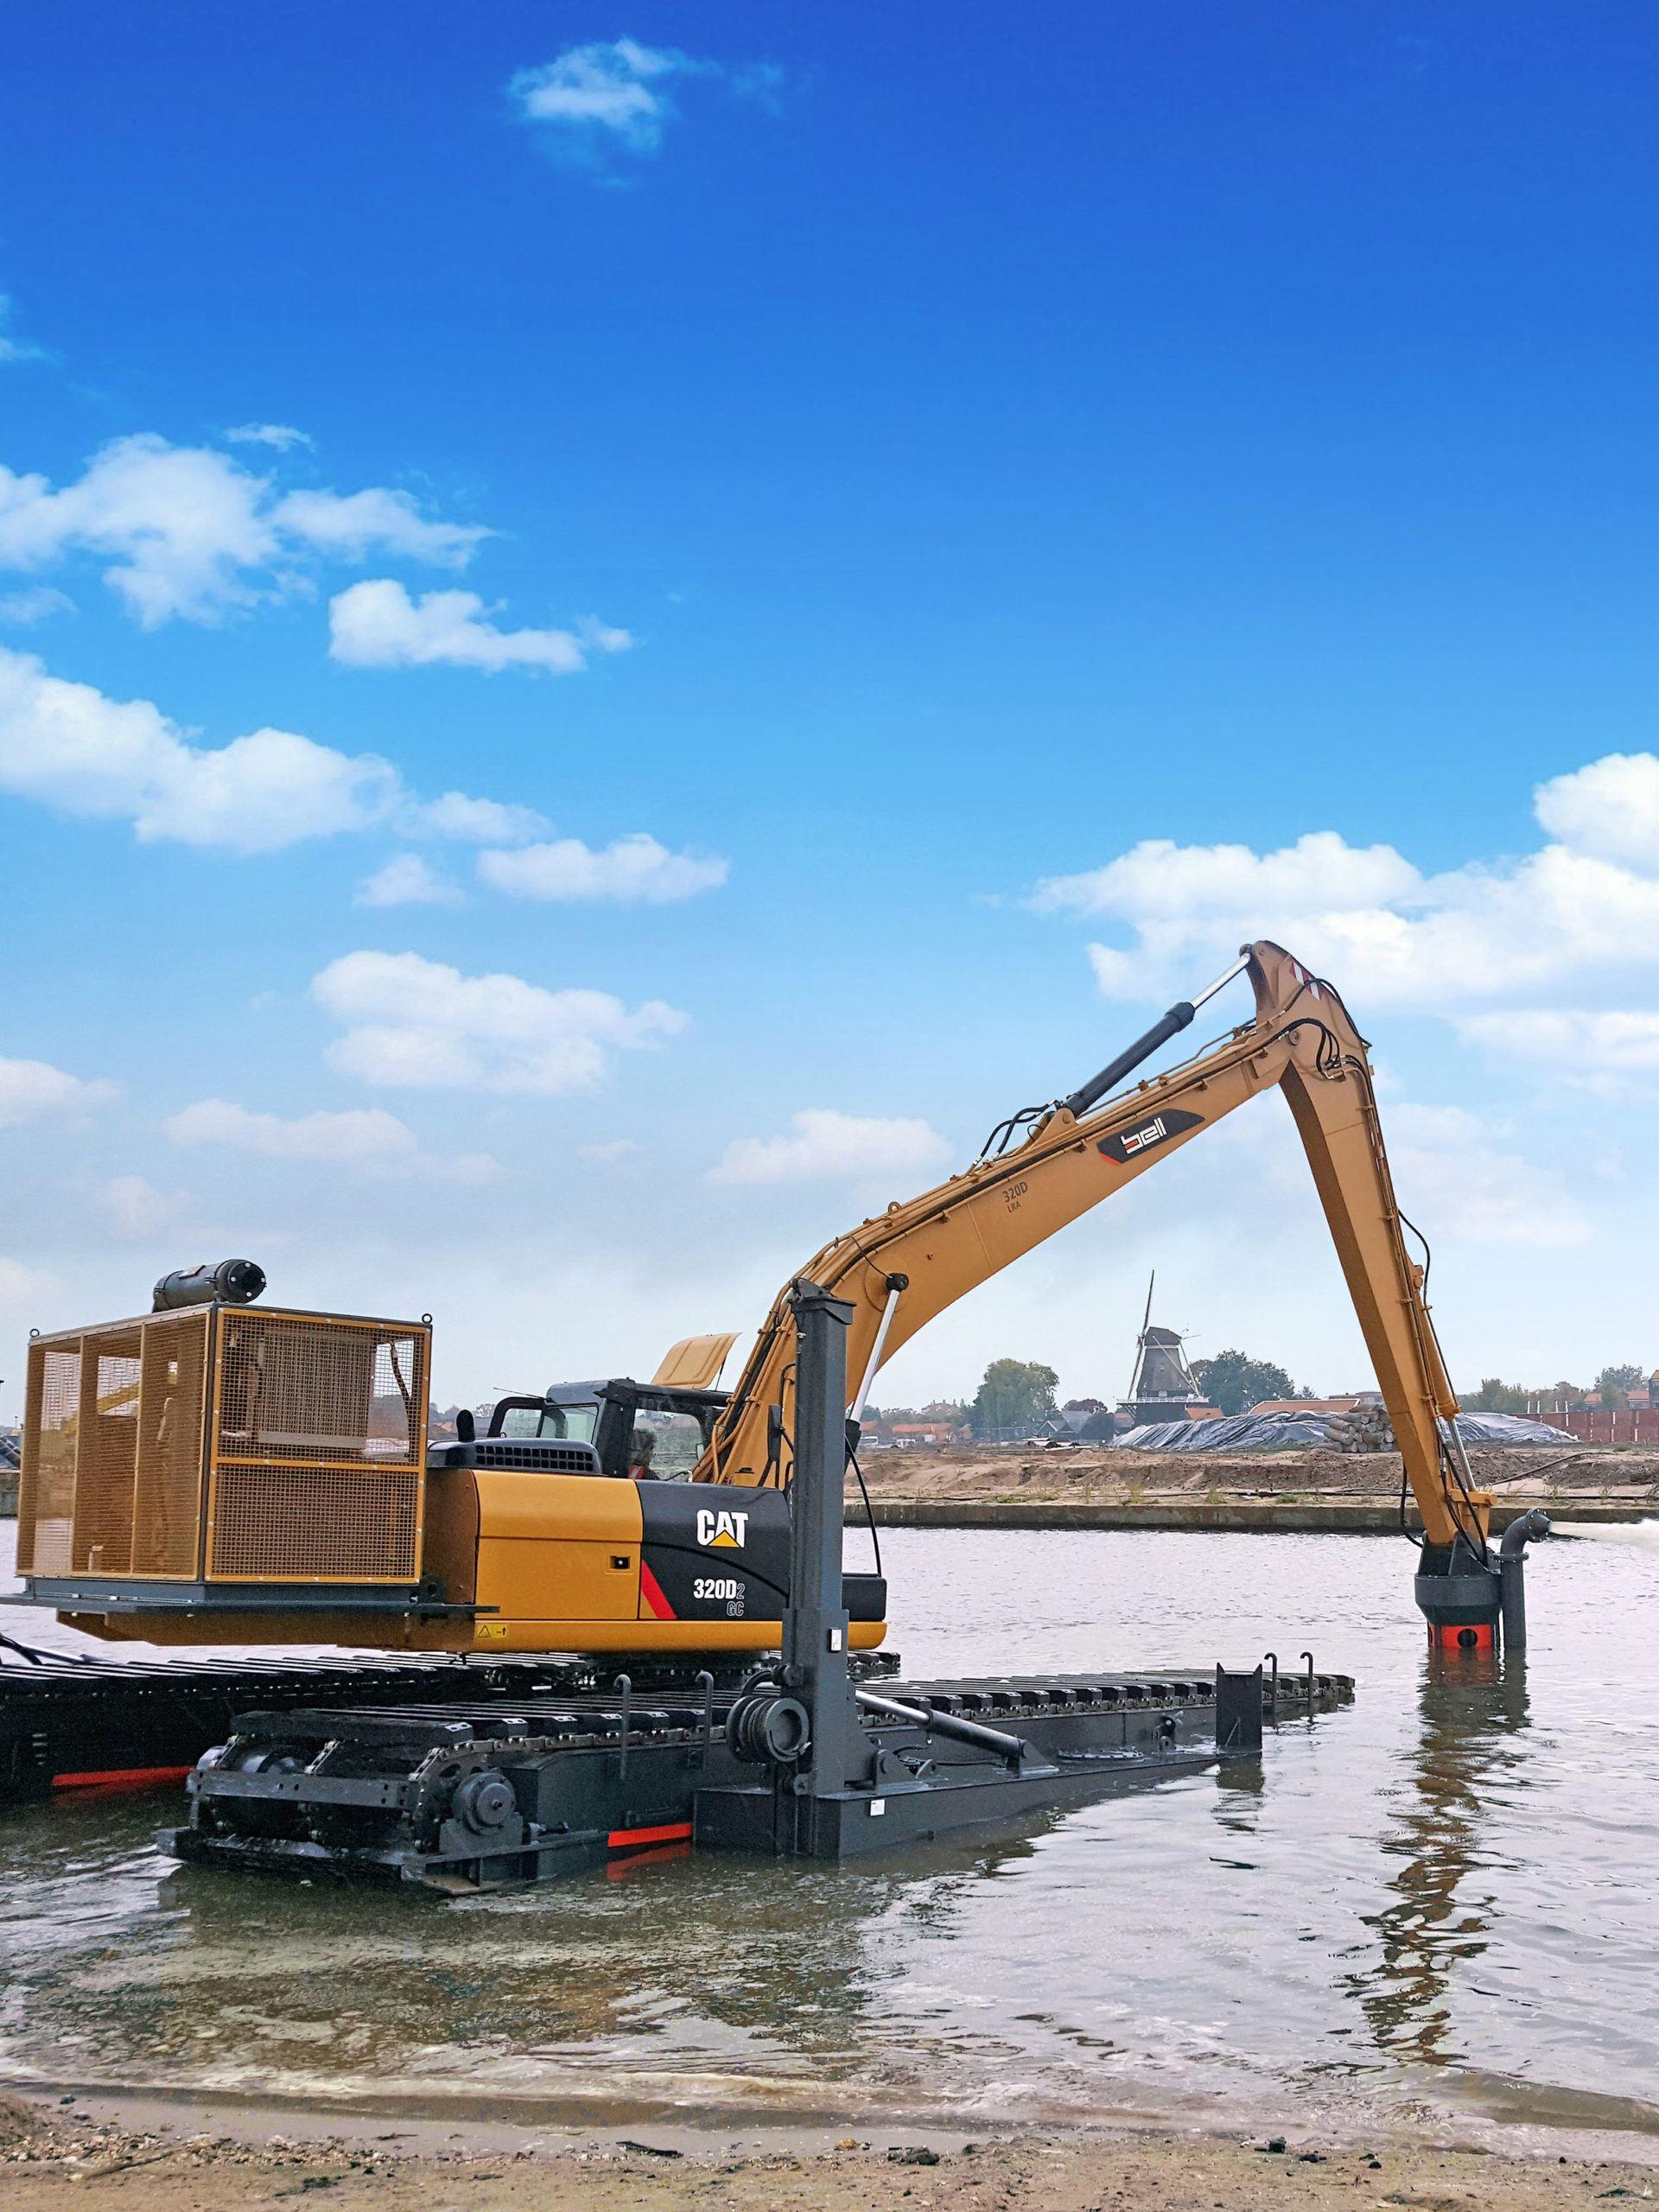 Bell dredging pump on an amphibious excavator with pump in water